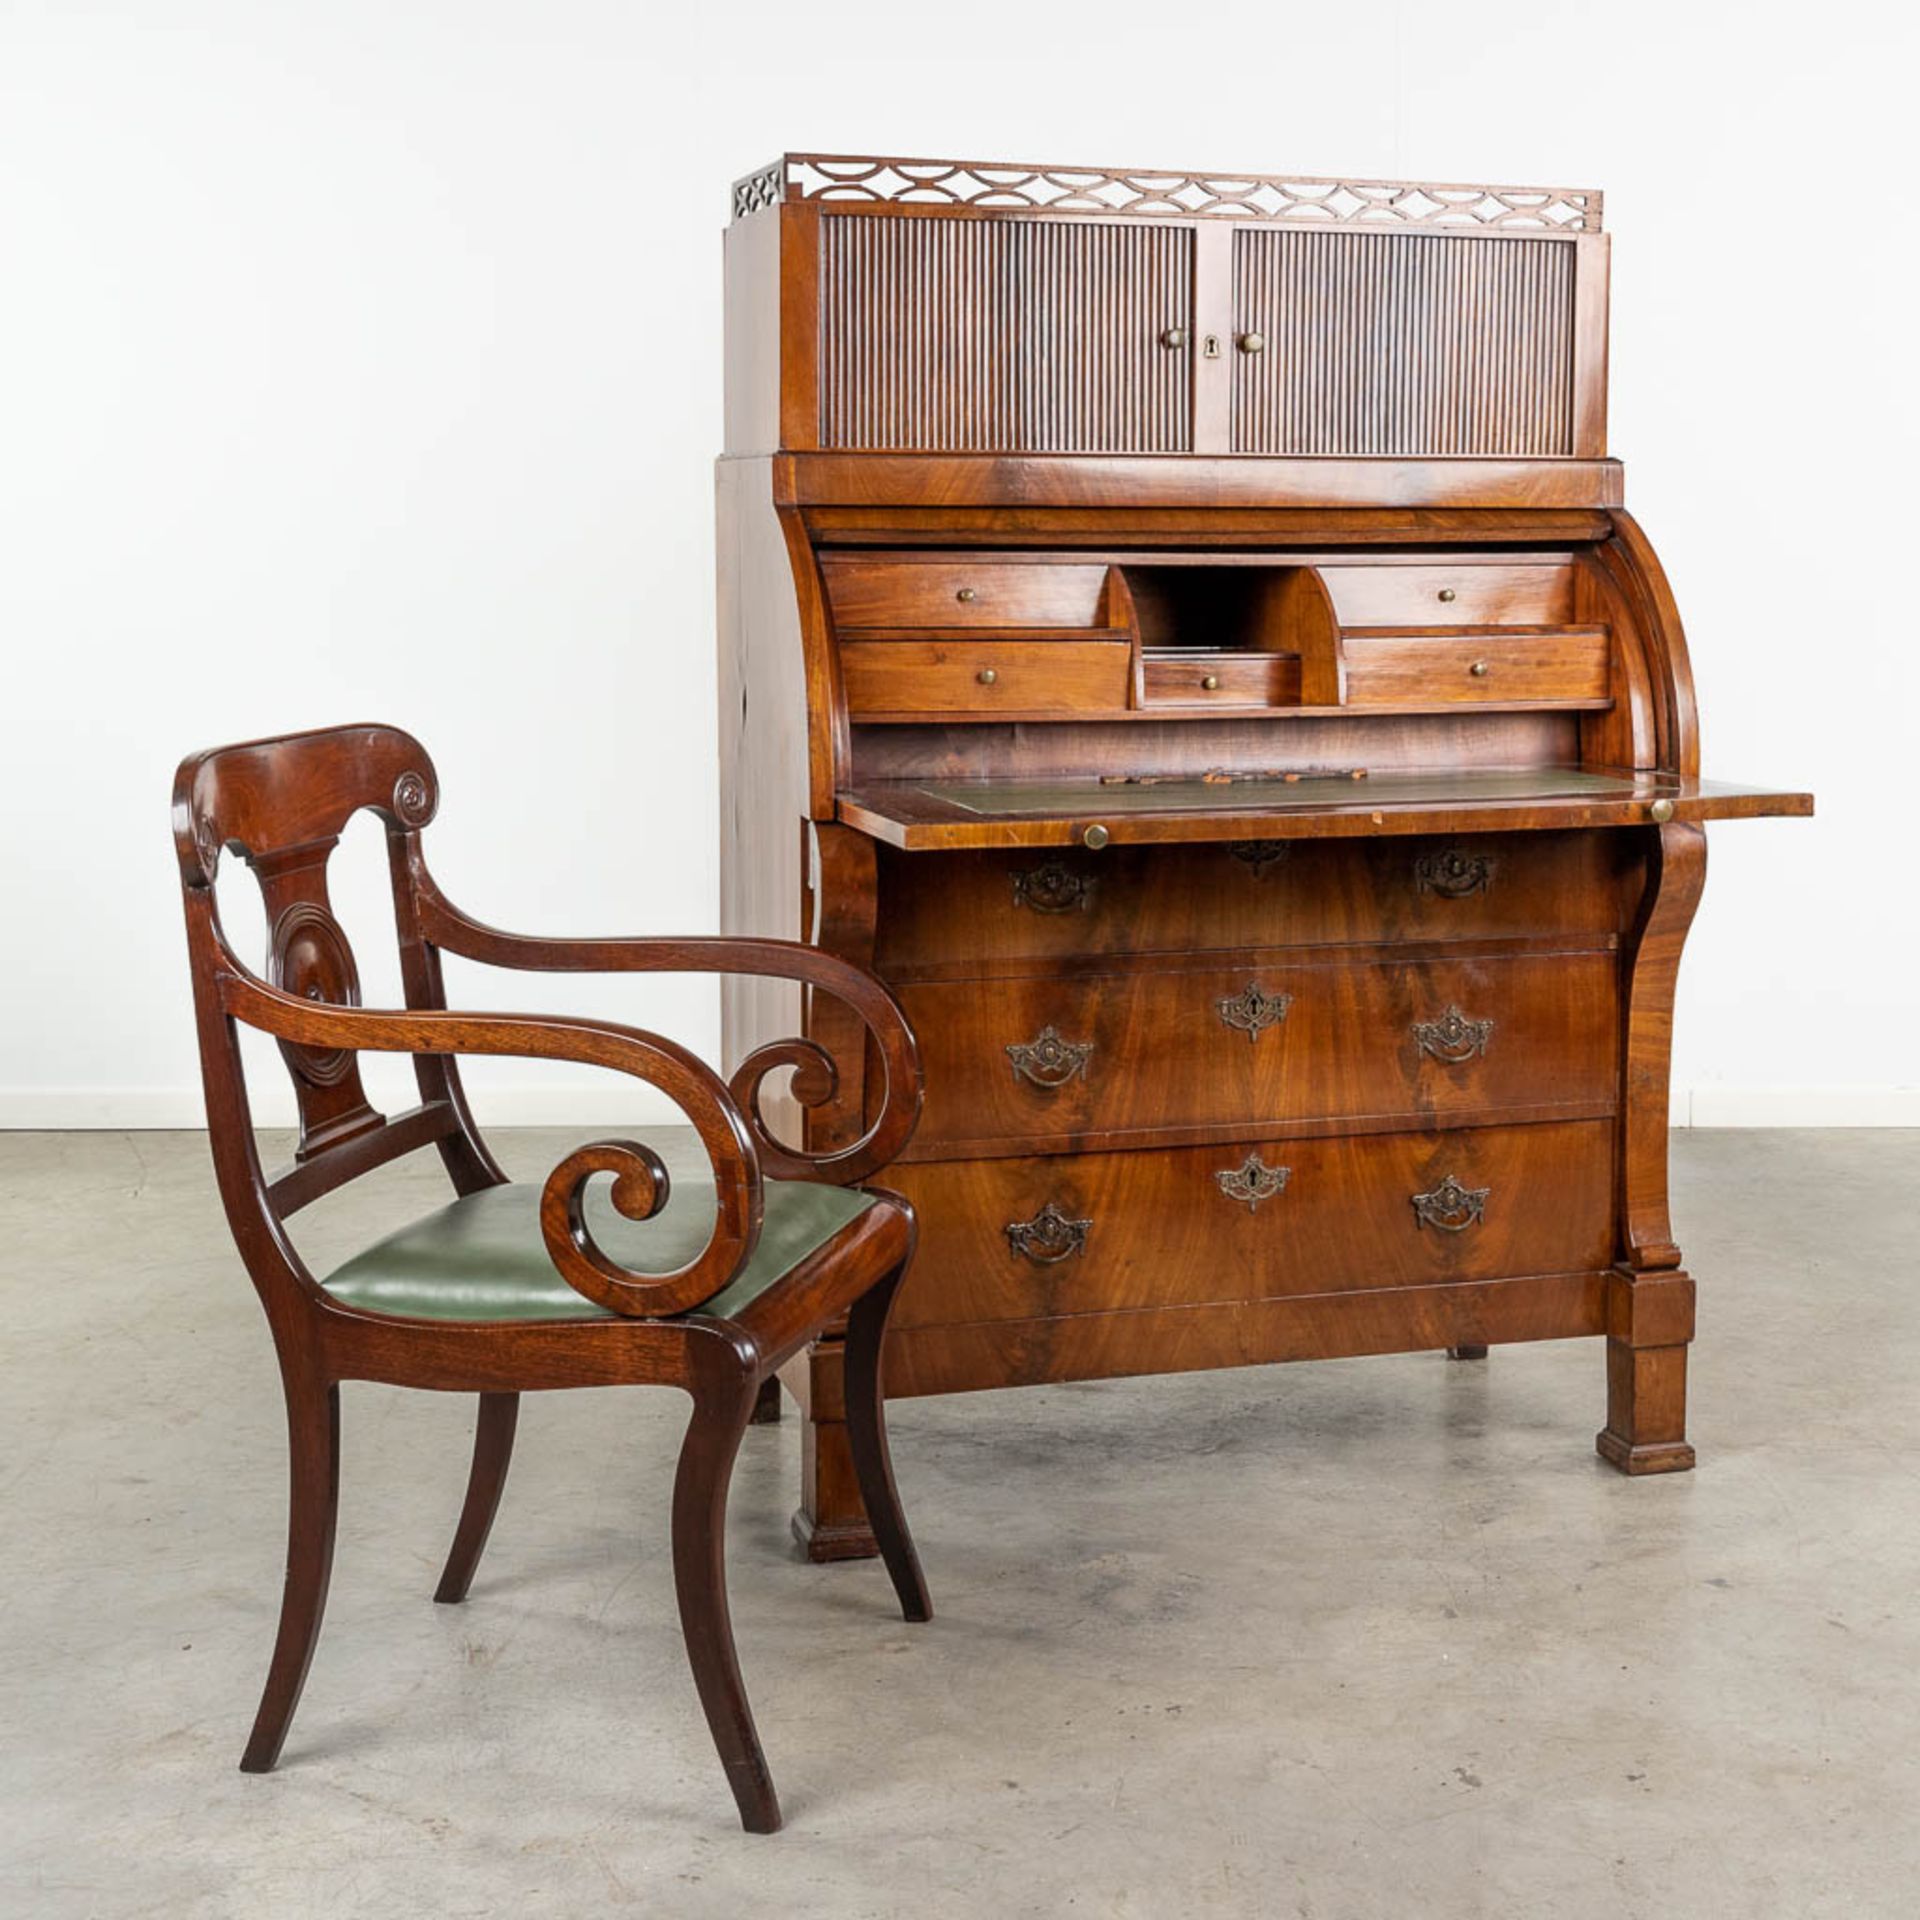 A commode Secretaire, with rolling shutters, mahogany veneer and a matching armchair. 19th century.